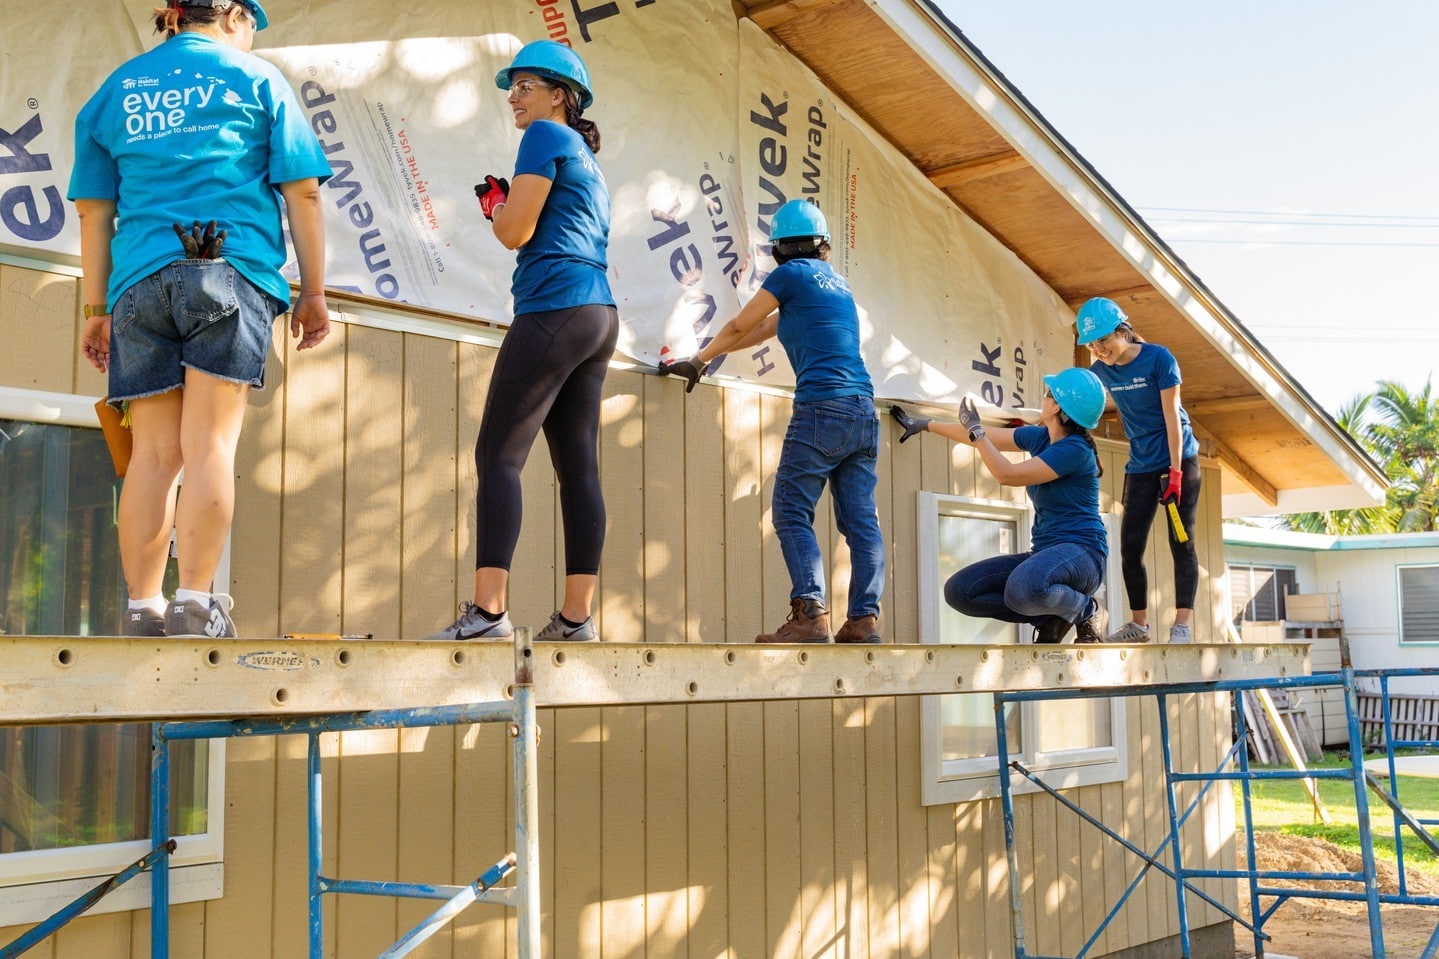 Together with the Honolulu Habitat for Humanity, Ward Village will host a build day for women volunteers to construct a house in Waimānalo for a local family. The March 11 event furthers our commitment to creating affordable housing on Oʻahu and acknowledges the vital role women play in building communities. We invite you to participate by making a donation or by signing up to volunteer with the Wahine Build team. Click the link in bio to learn more!